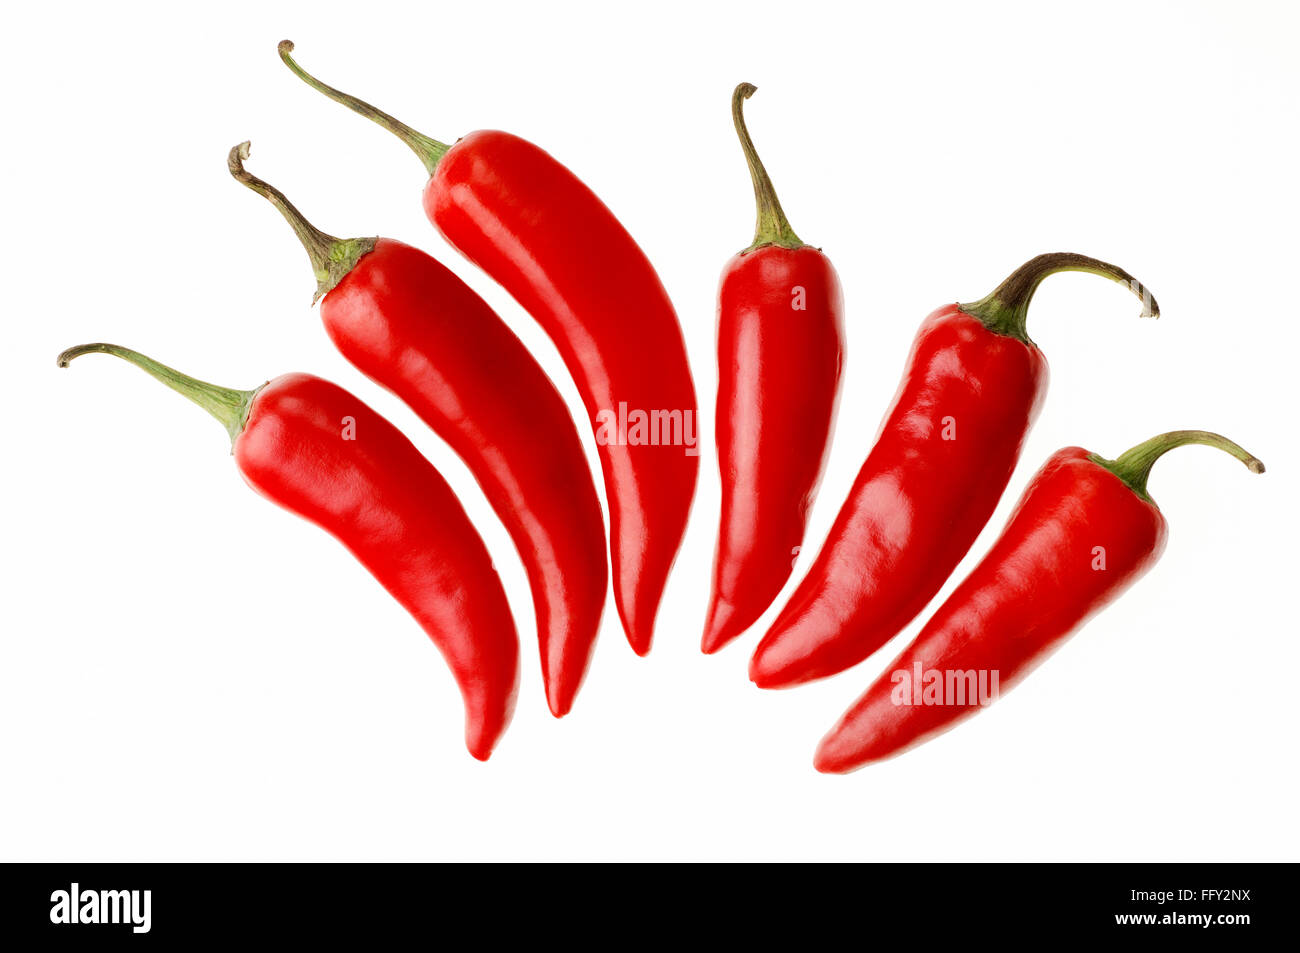 Indian spices , six red chilly or chillies capsicum annuum on white background Stock Photo